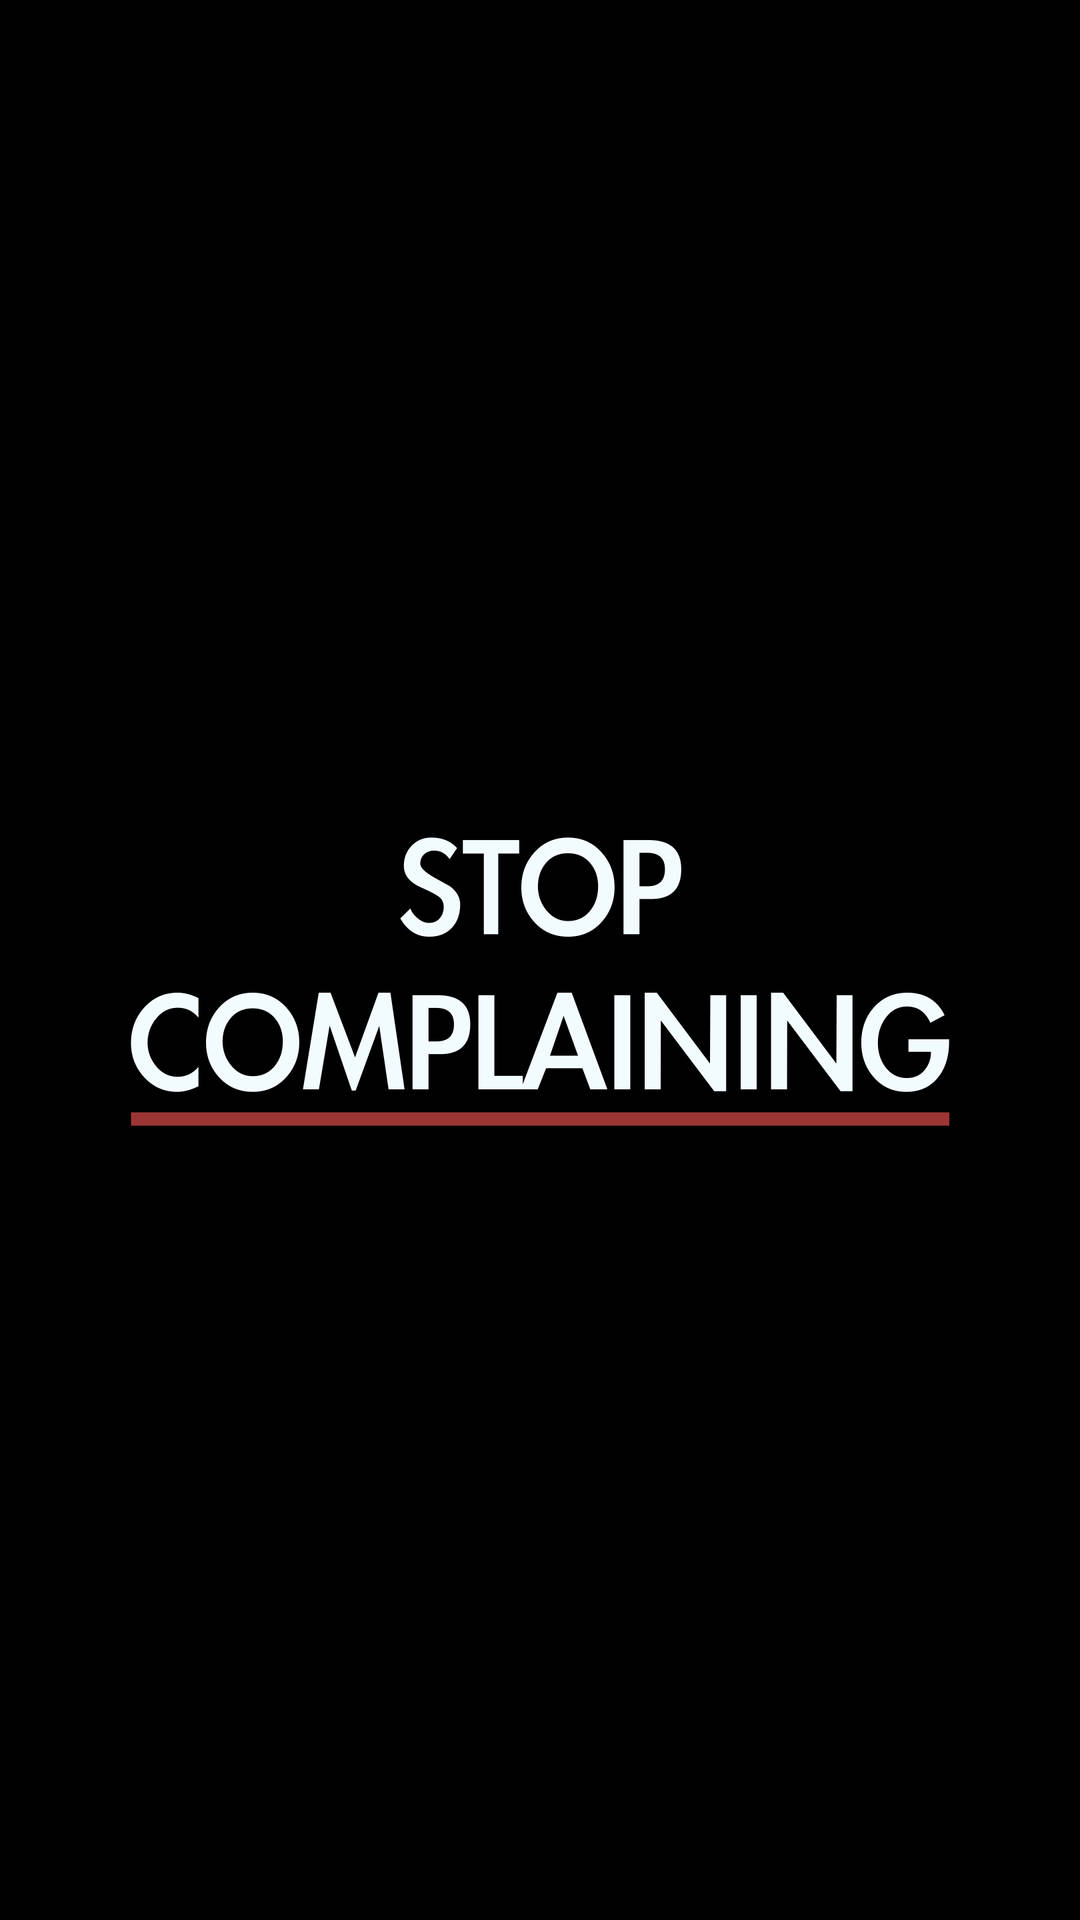 Stop Complaining Inspirational Quote Wallpaper